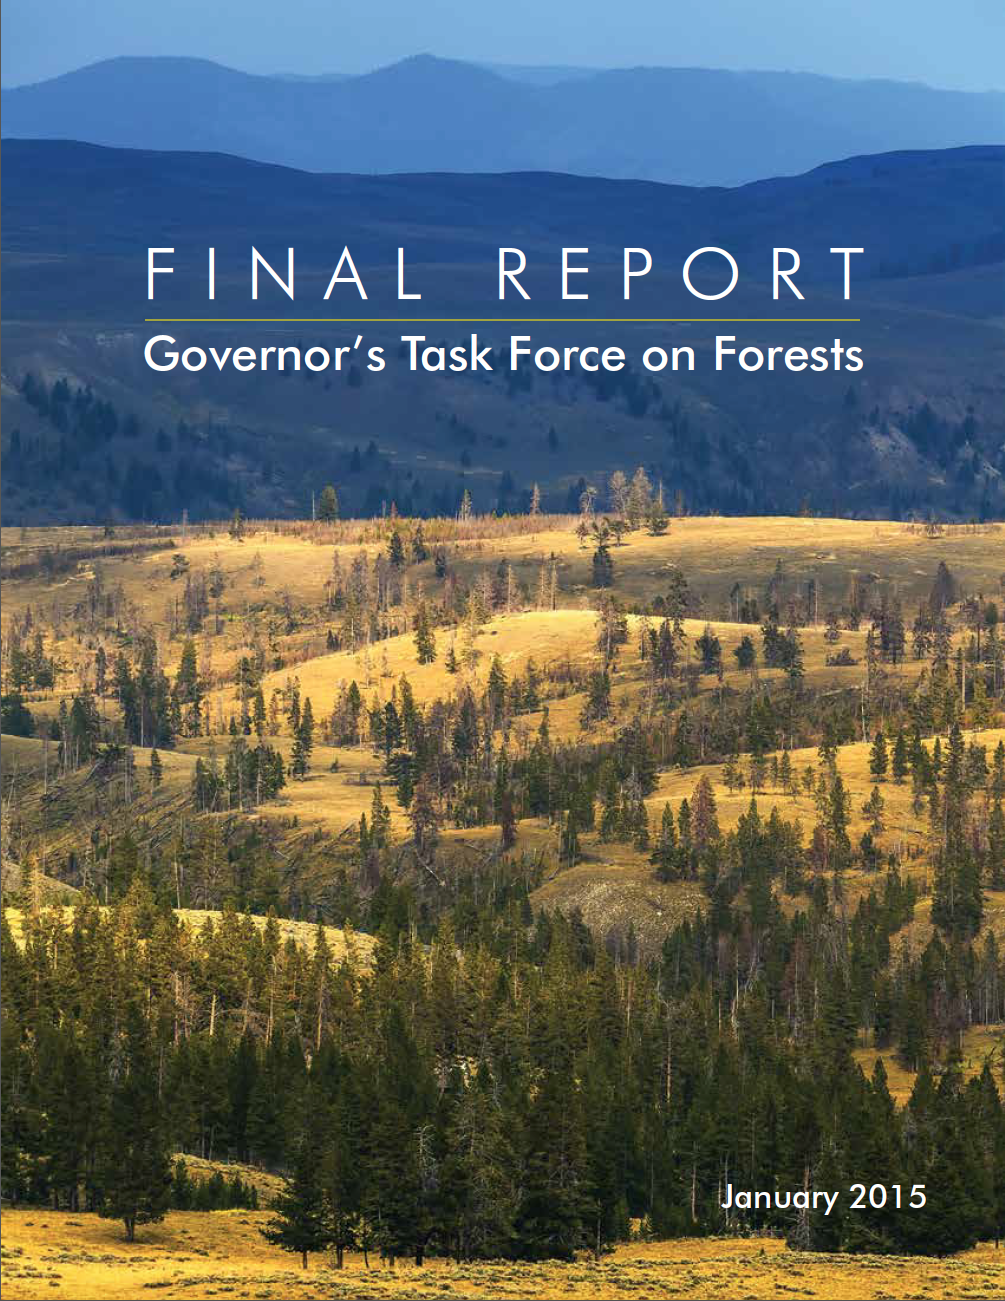 Final Report of the Governor's Task Force on Forests published.